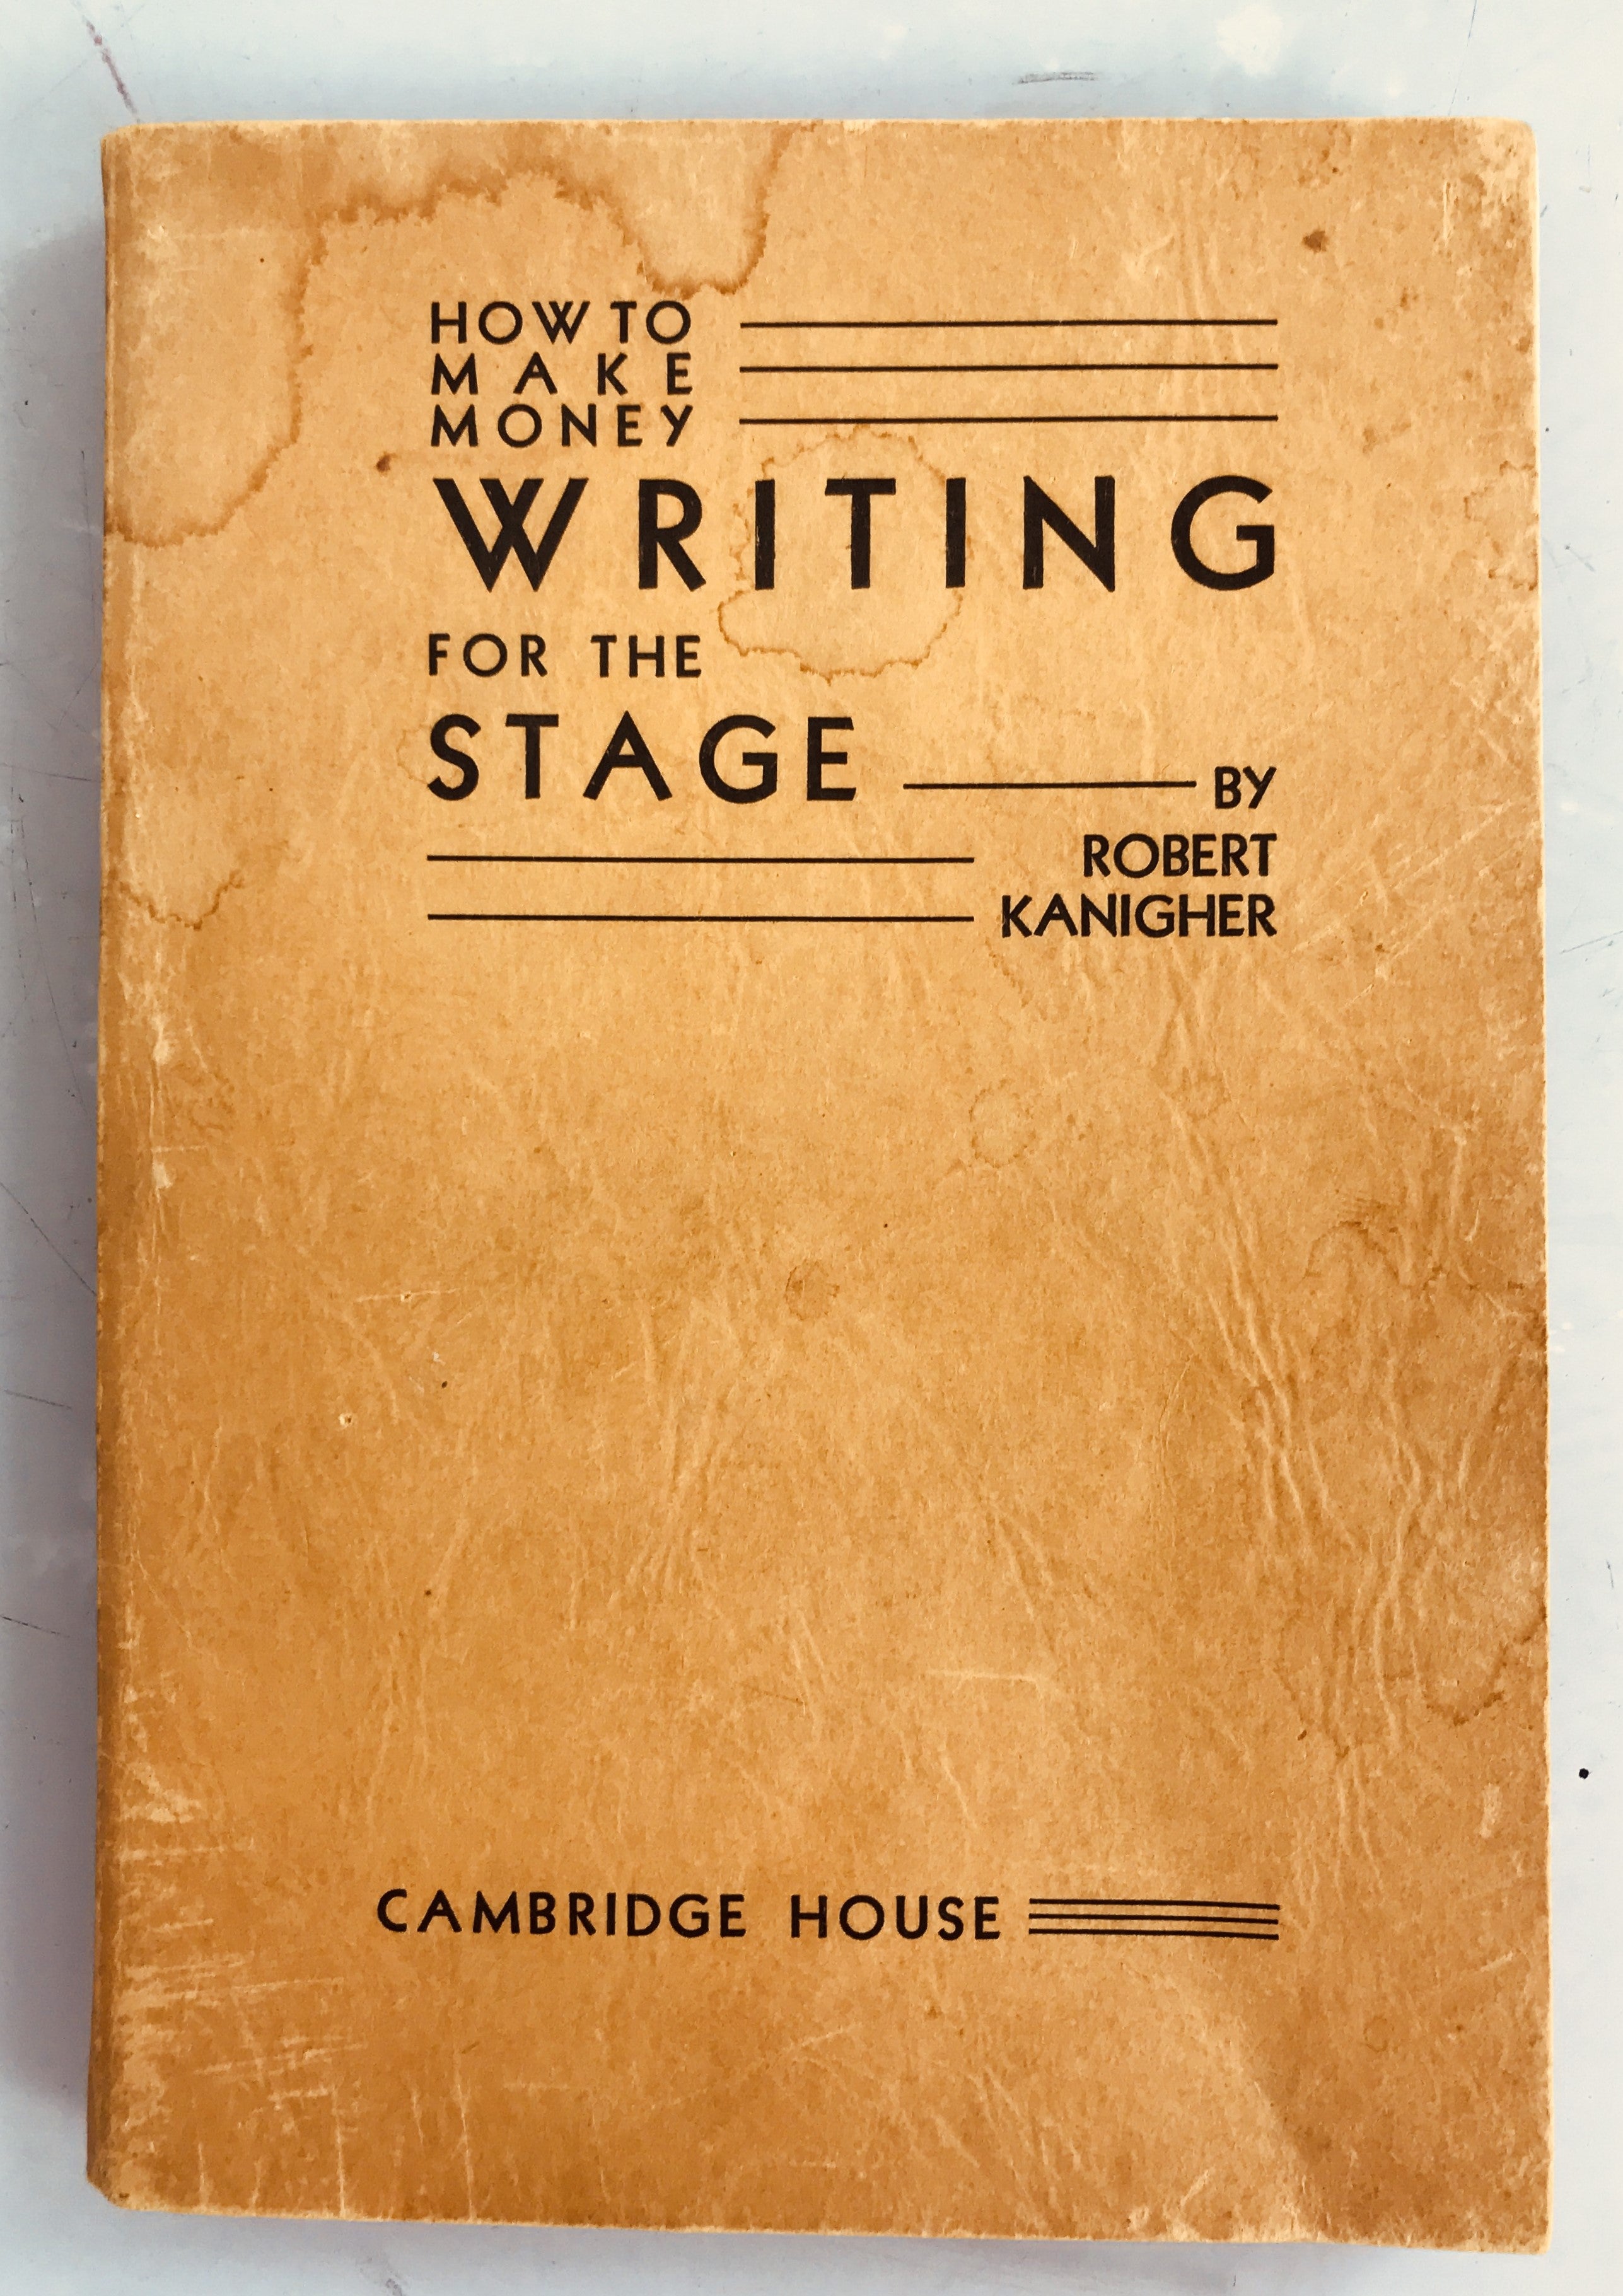 How to Make Money Writing for the Stage by Robert Kanigher 1943 SC